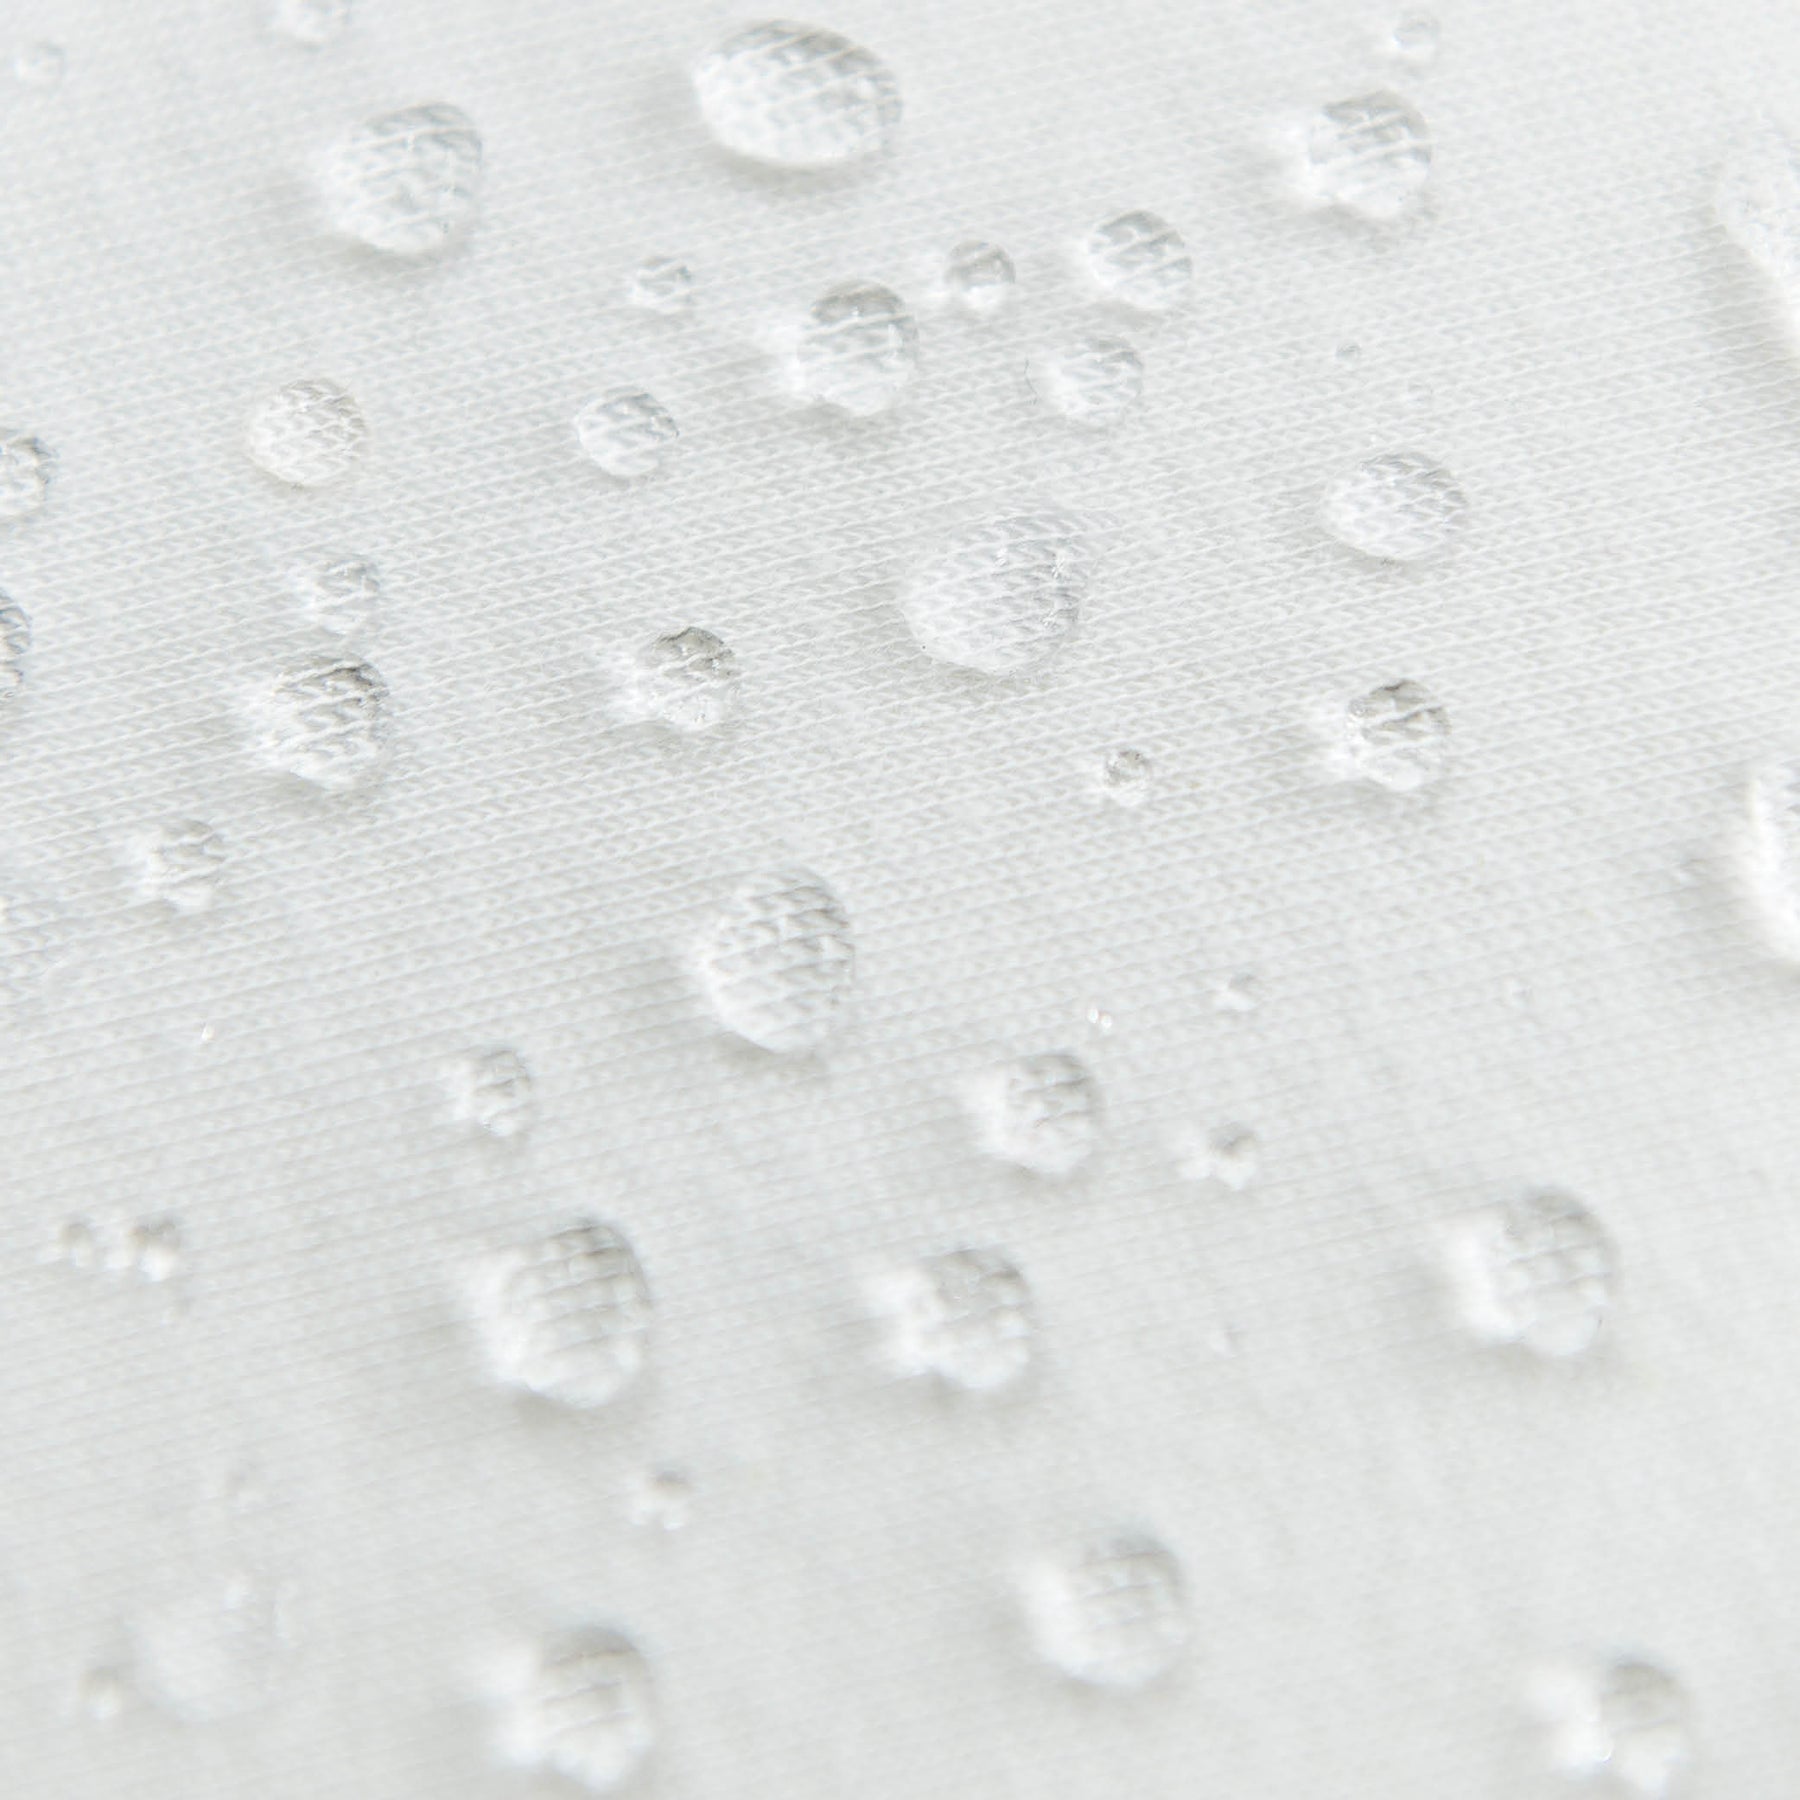 Close-up image of the white mattress protector fabric with water droplets all over